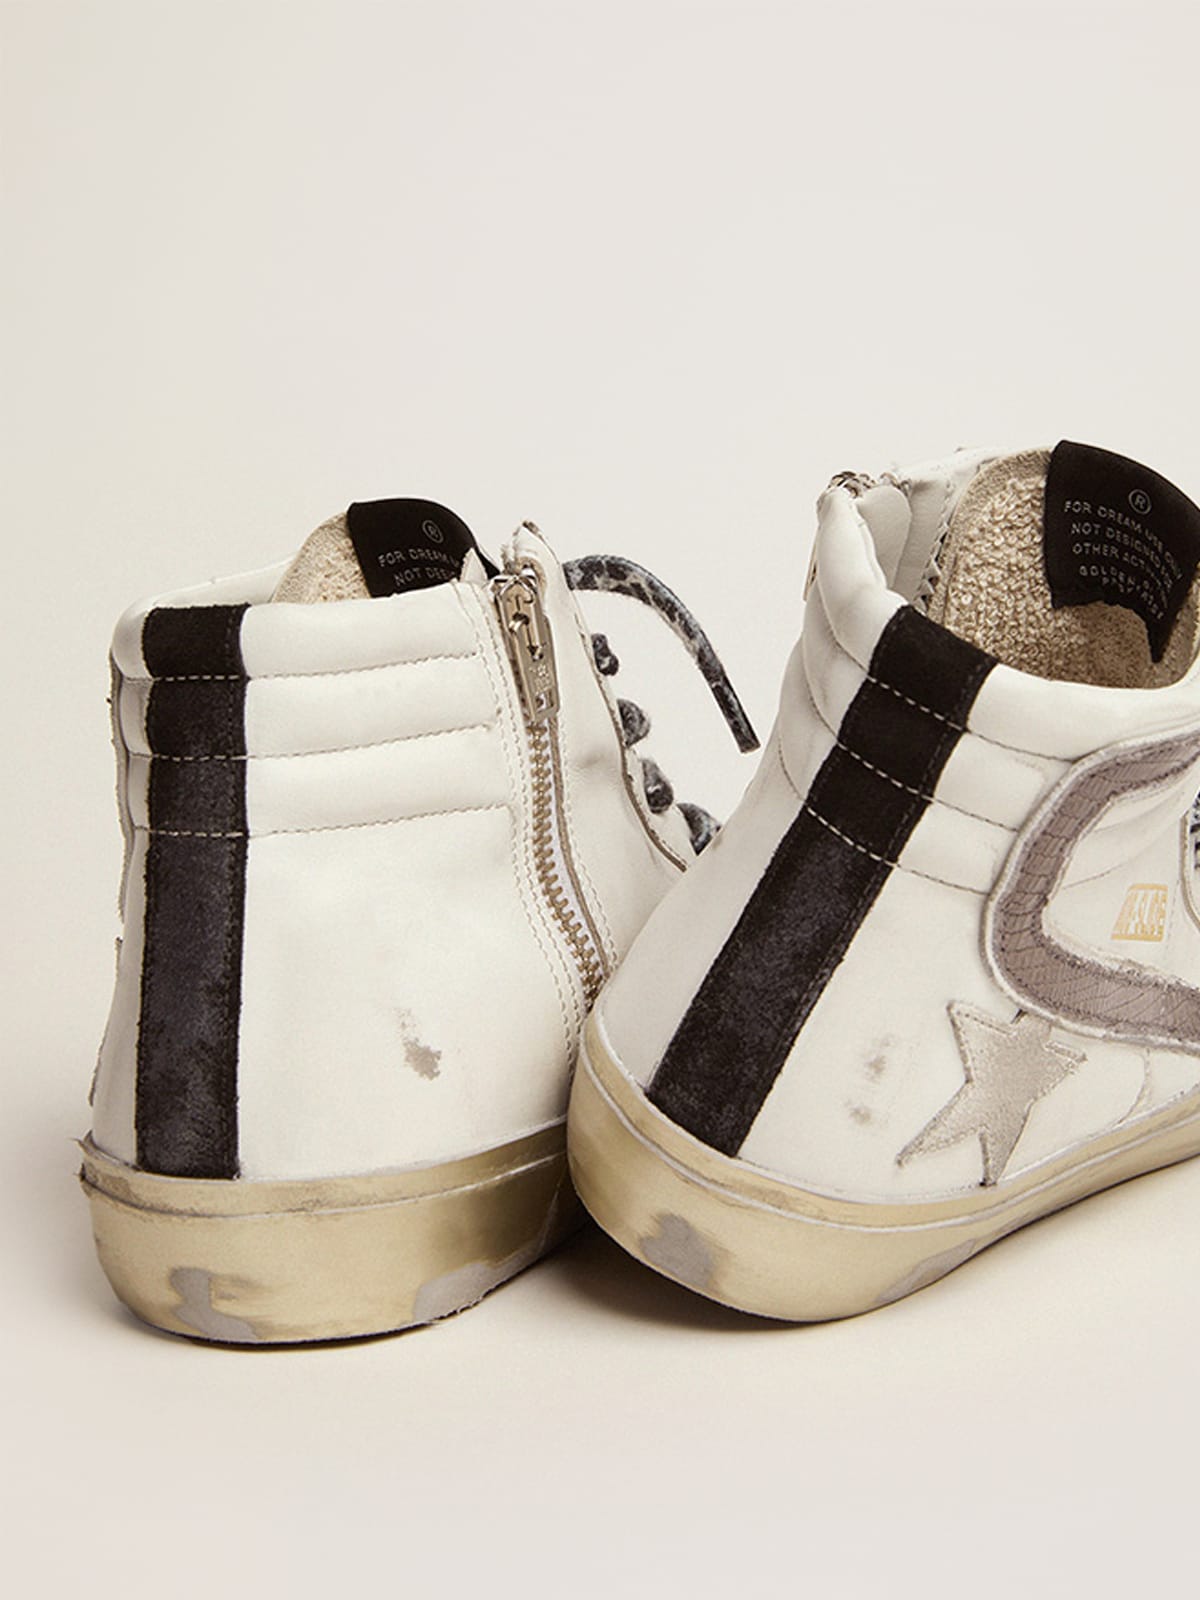 Golden Goose - Slide sneakers with white suede star and dove-gray lizard-print leather flash in 